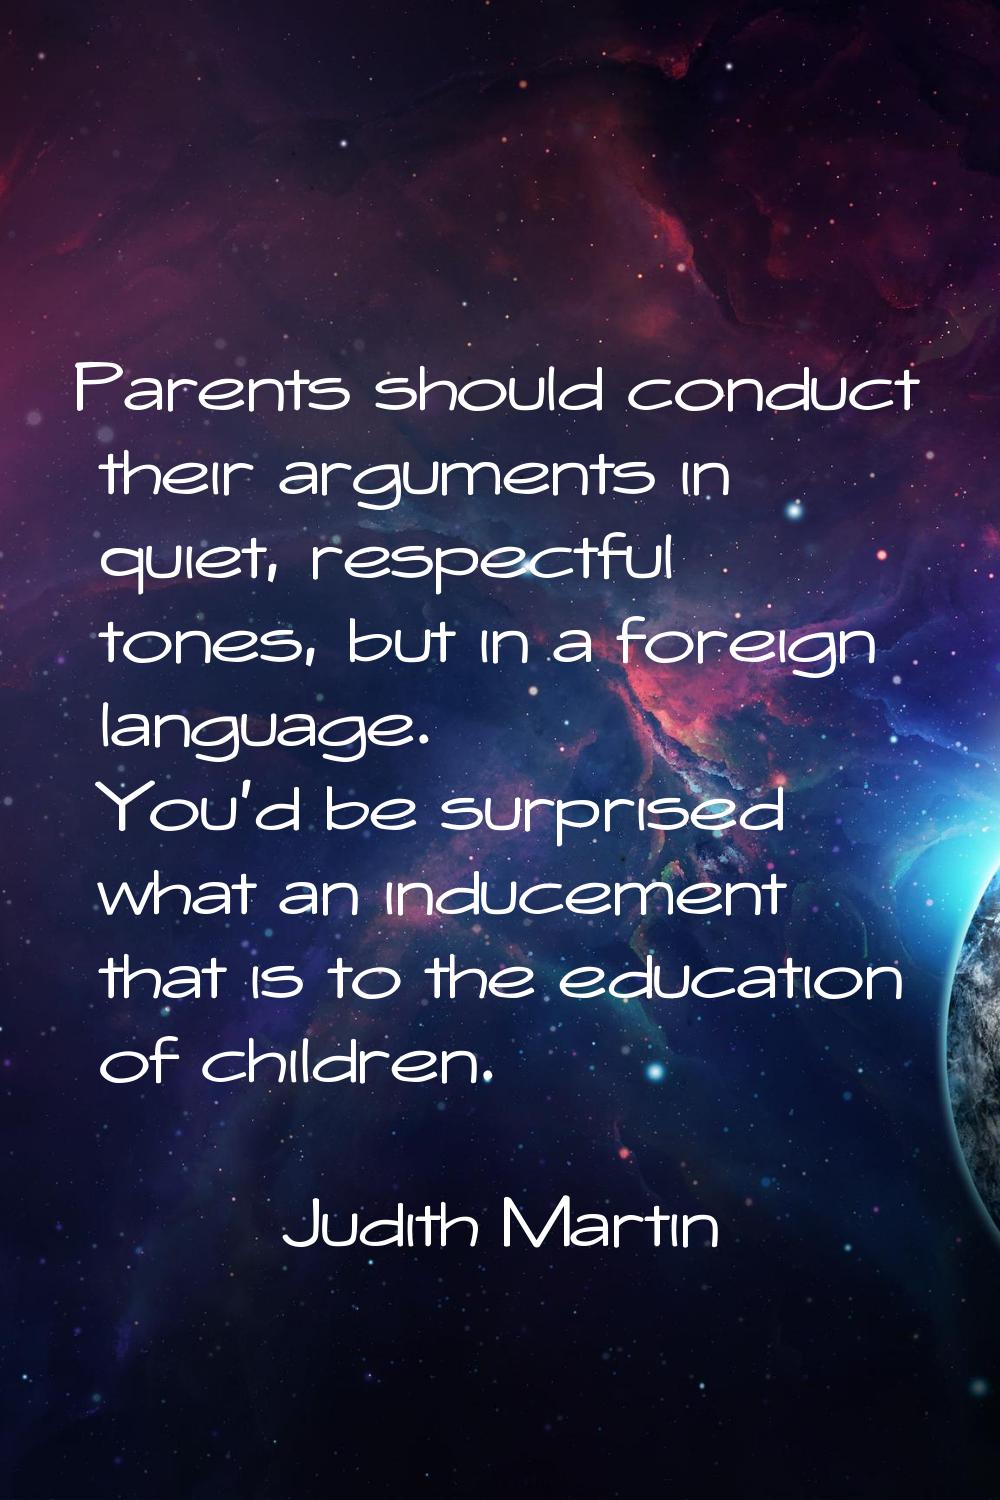 Parents should conduct their arguments in quiet, respectful tones, but in a foreign language. You'd